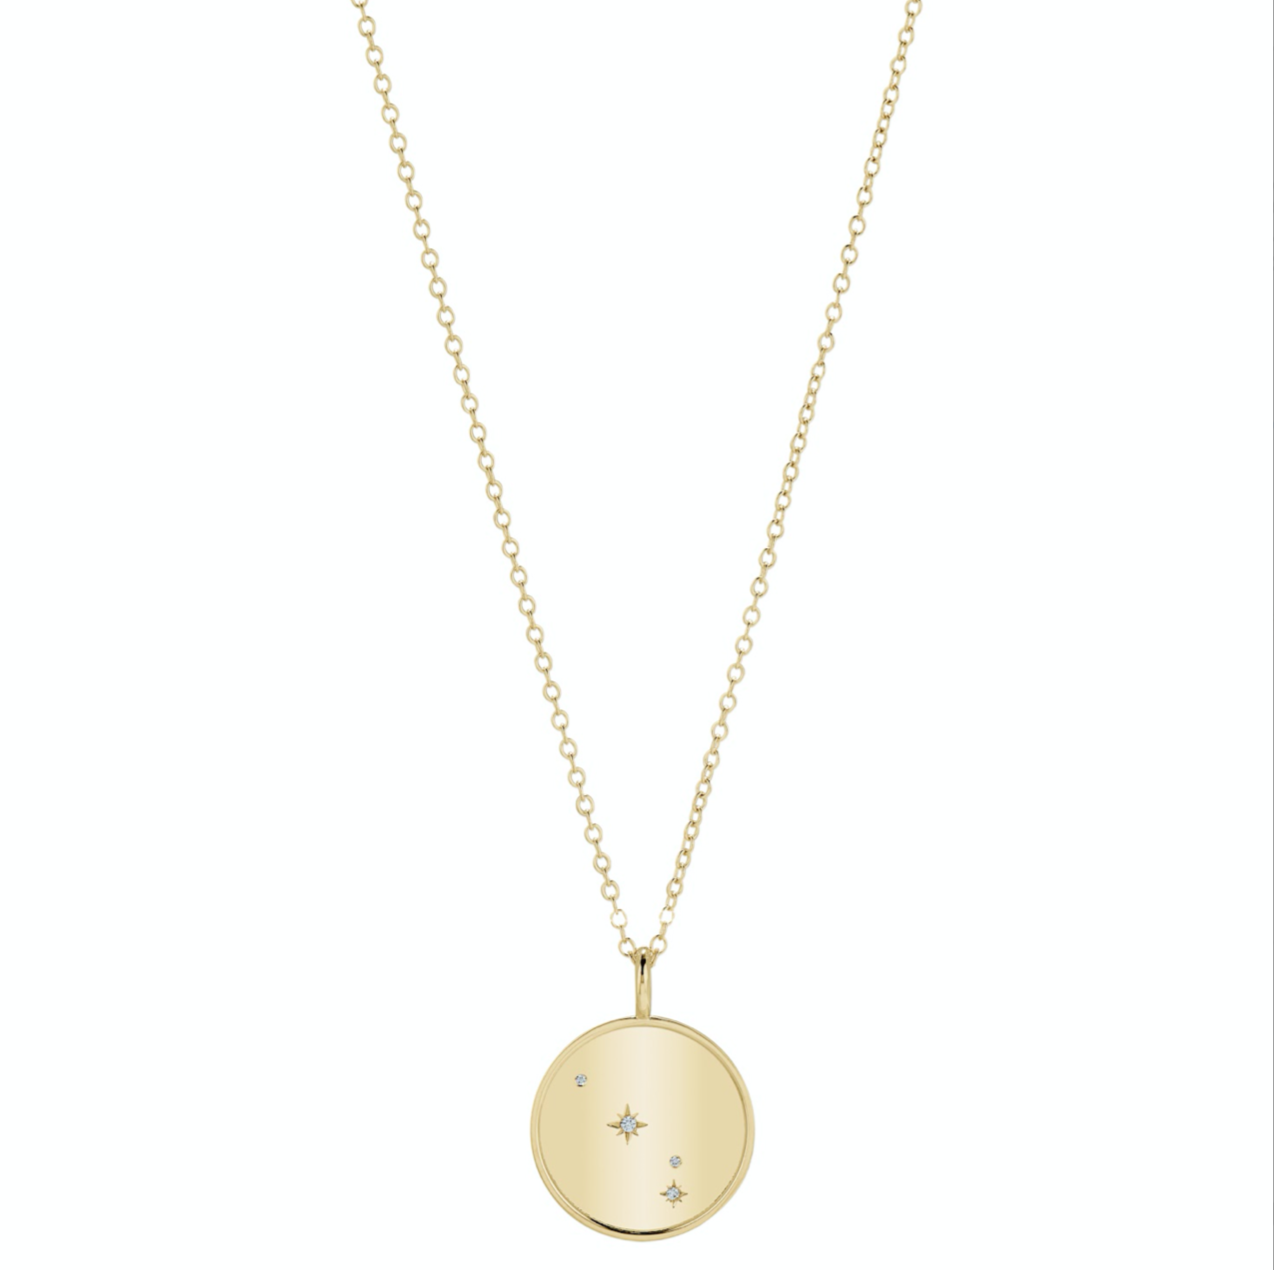 Double Sided Aries Constellation Pendant Necklace